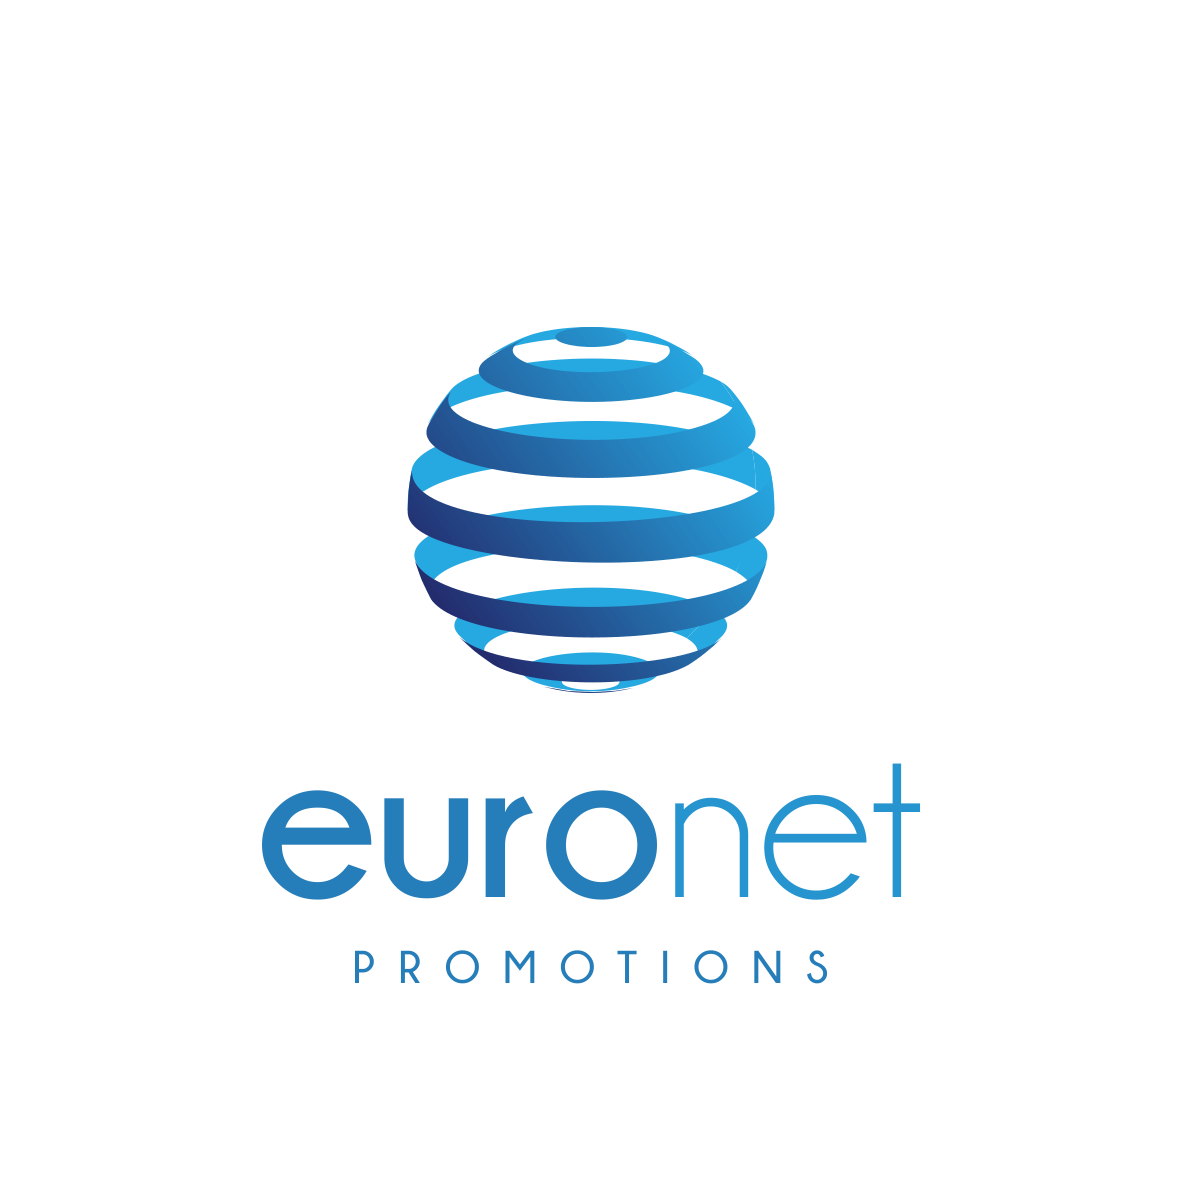 Euronet-Promotions